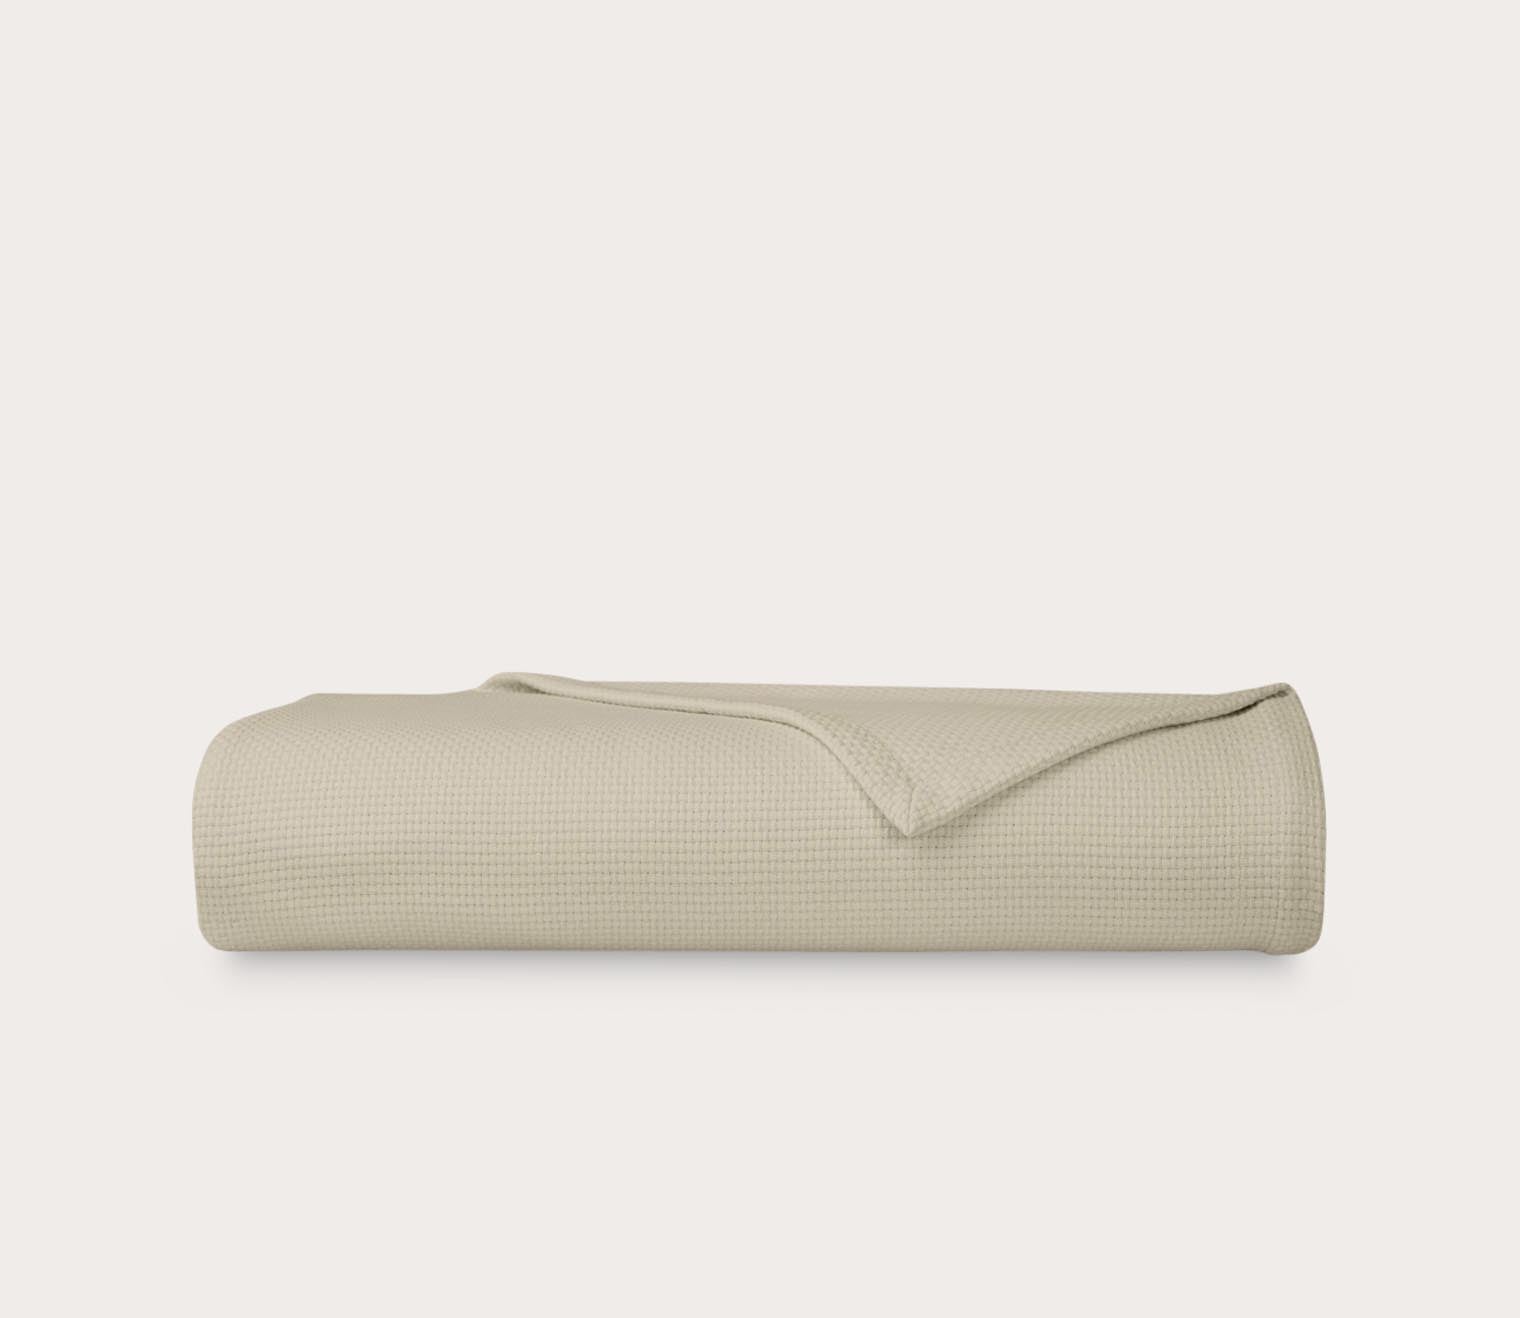 Maillon Basketweave Cotton Bed Blanket by Yves Delorme